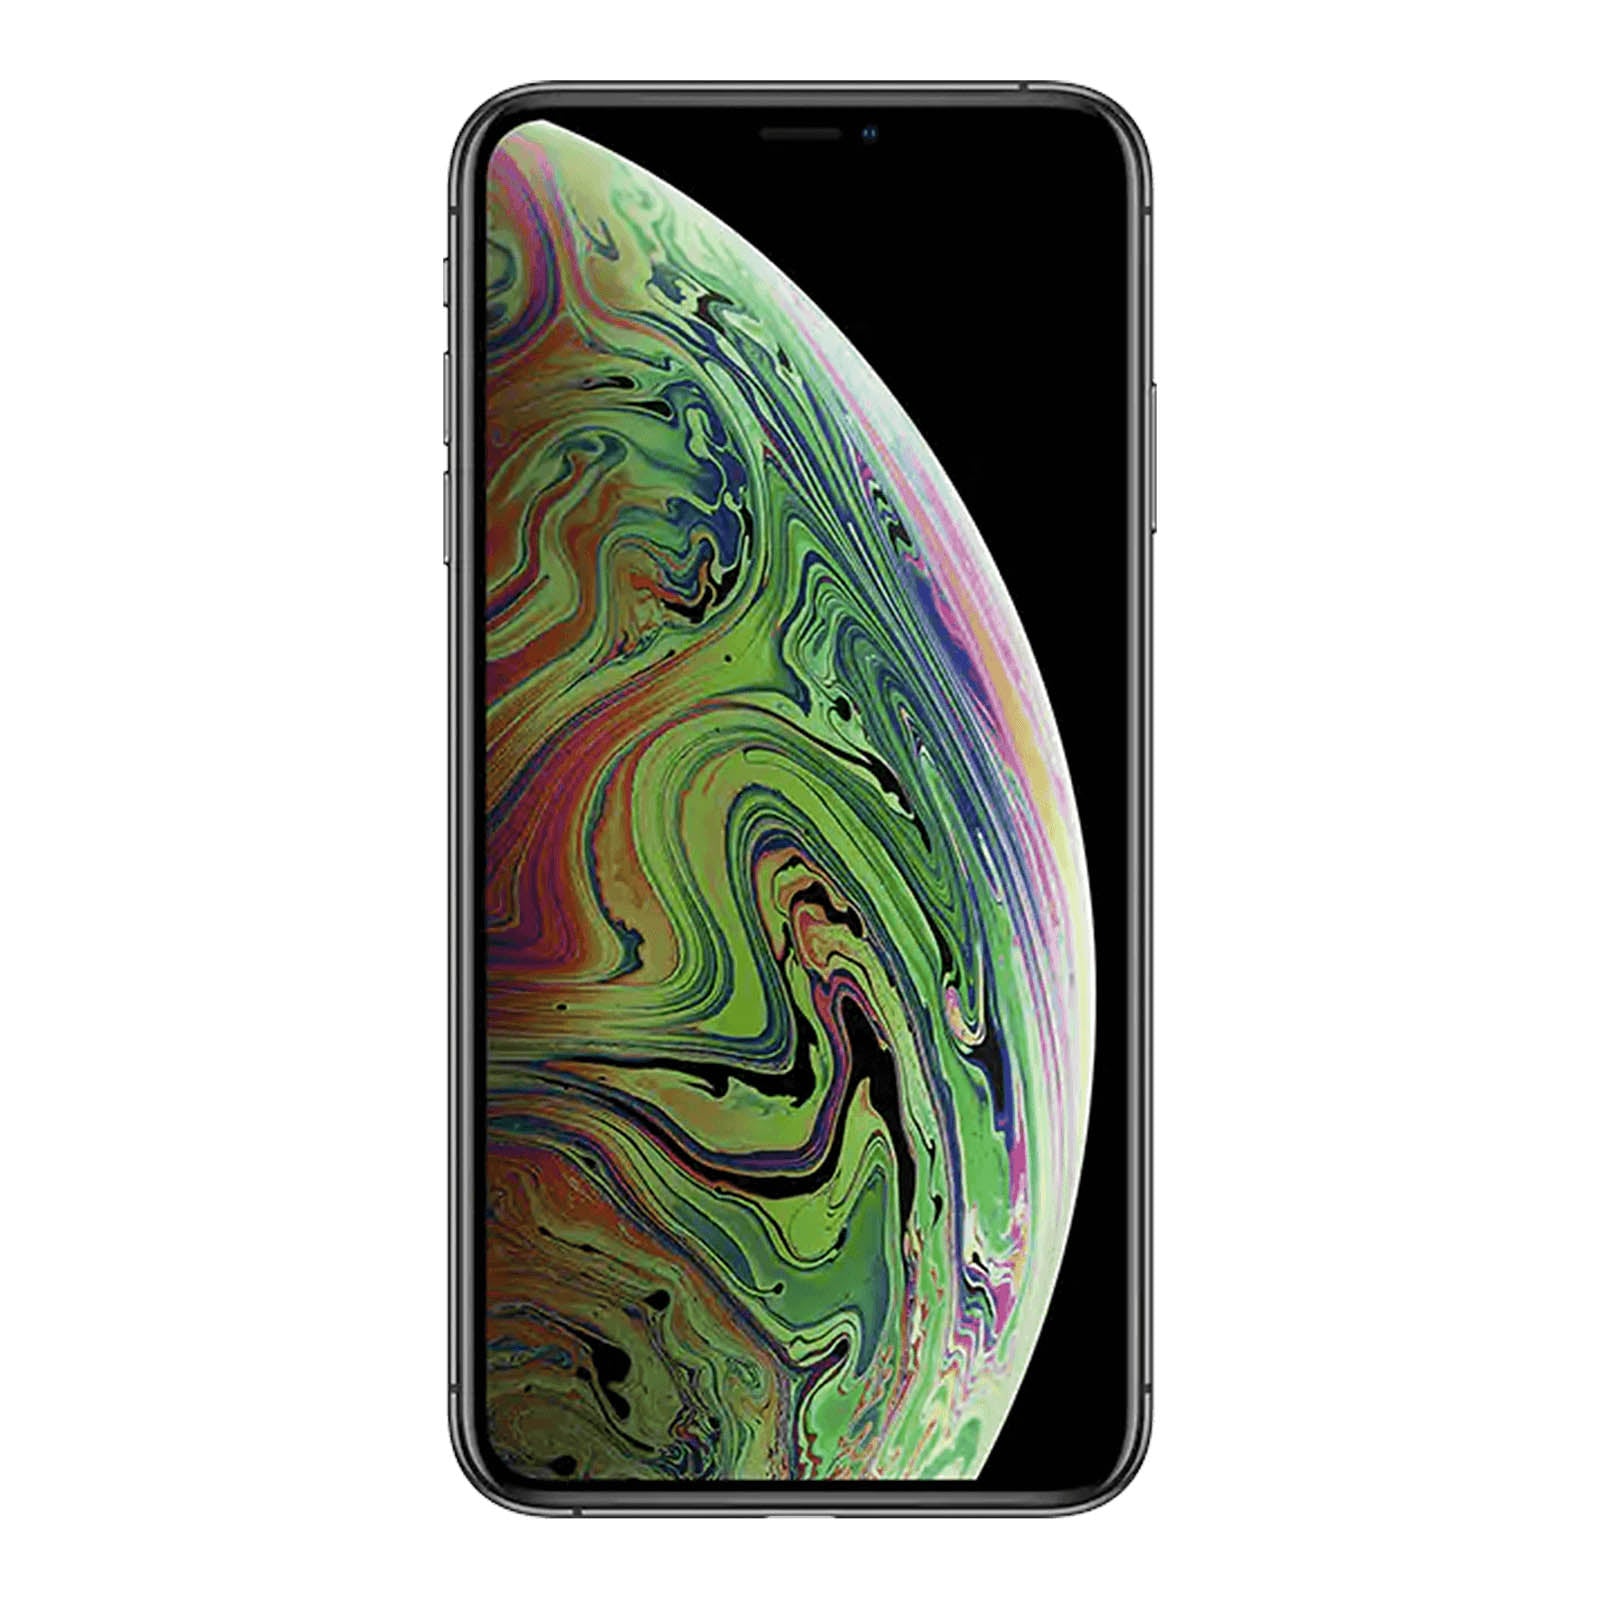 Apple iPhone XS 256GB Space Grey Good - AT&T